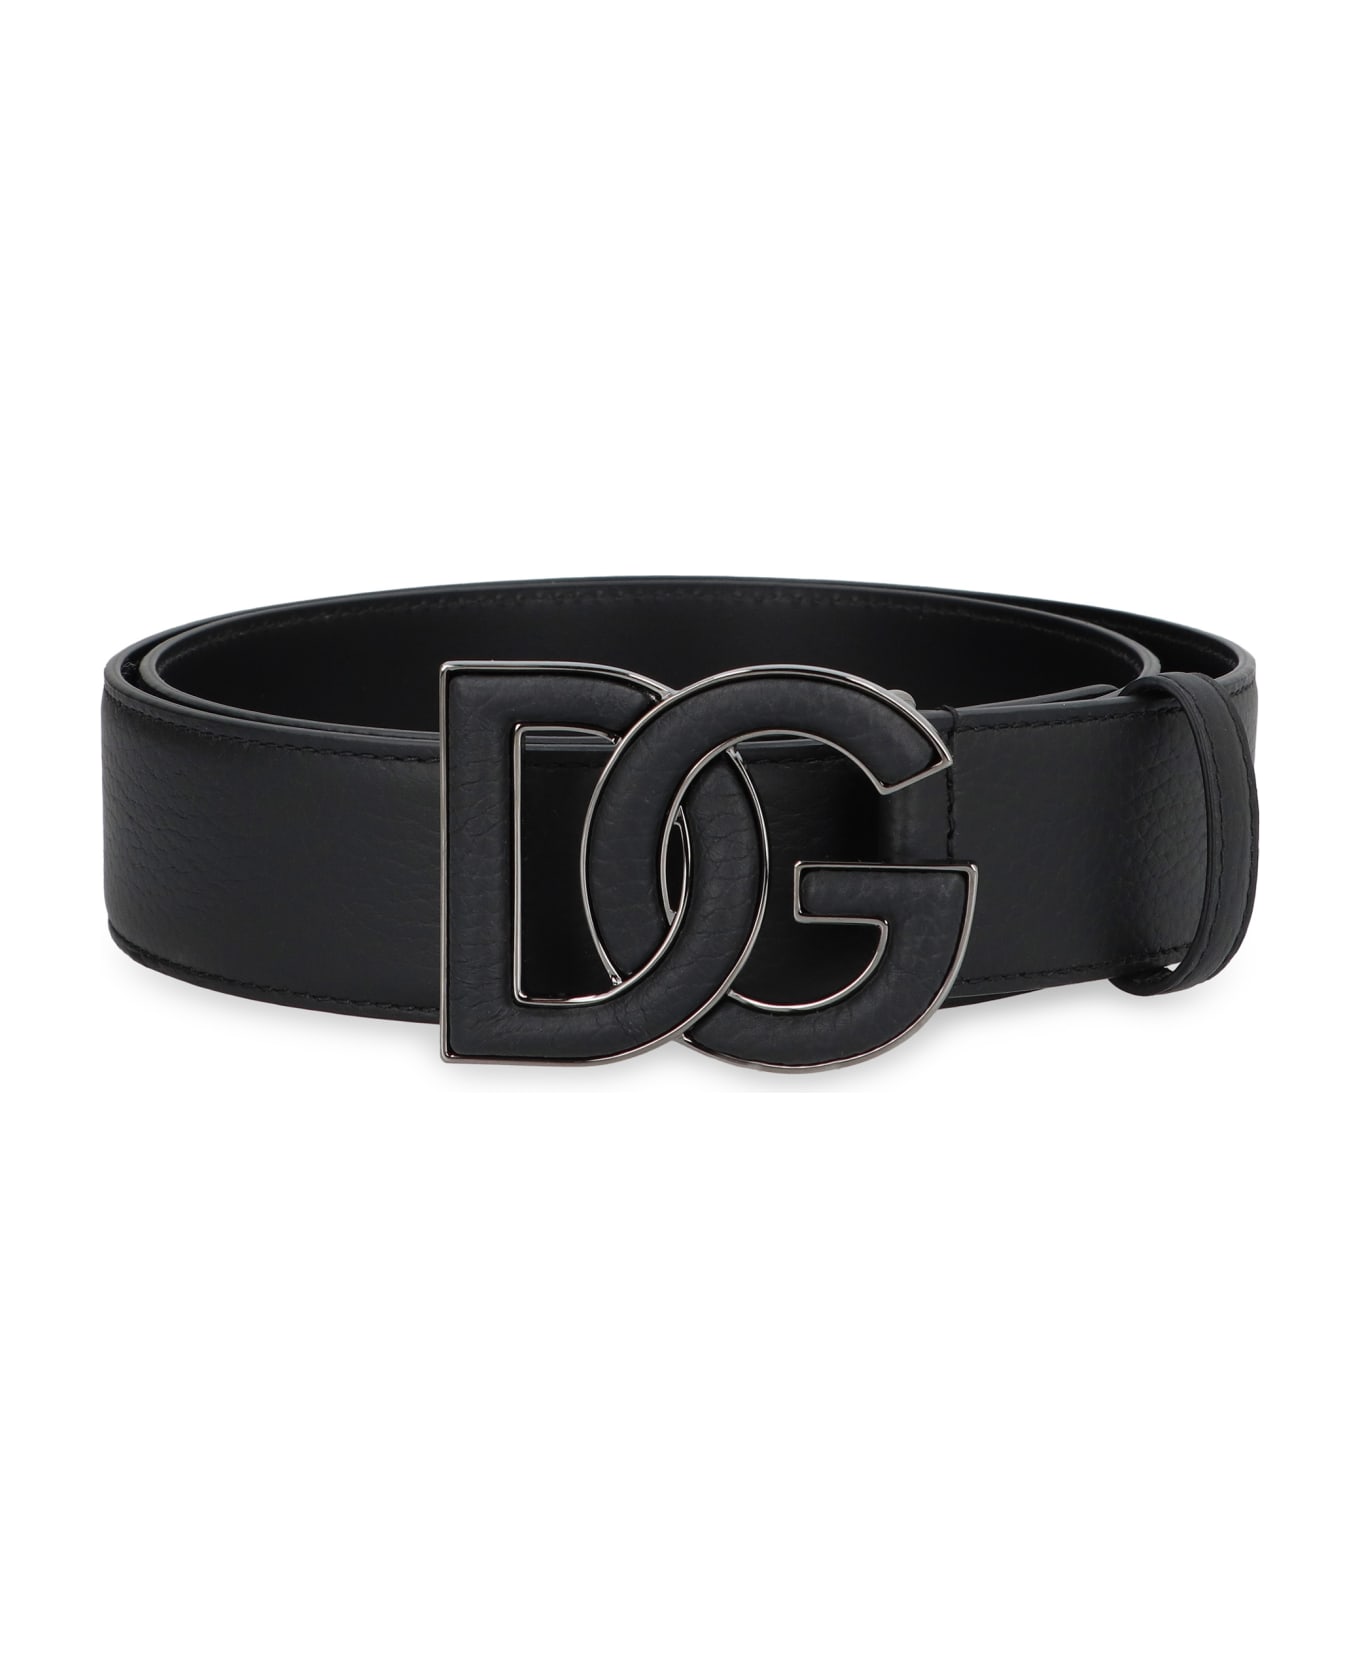 Dolce & Gabbana Calf Leather Belt With Buckle - Nero